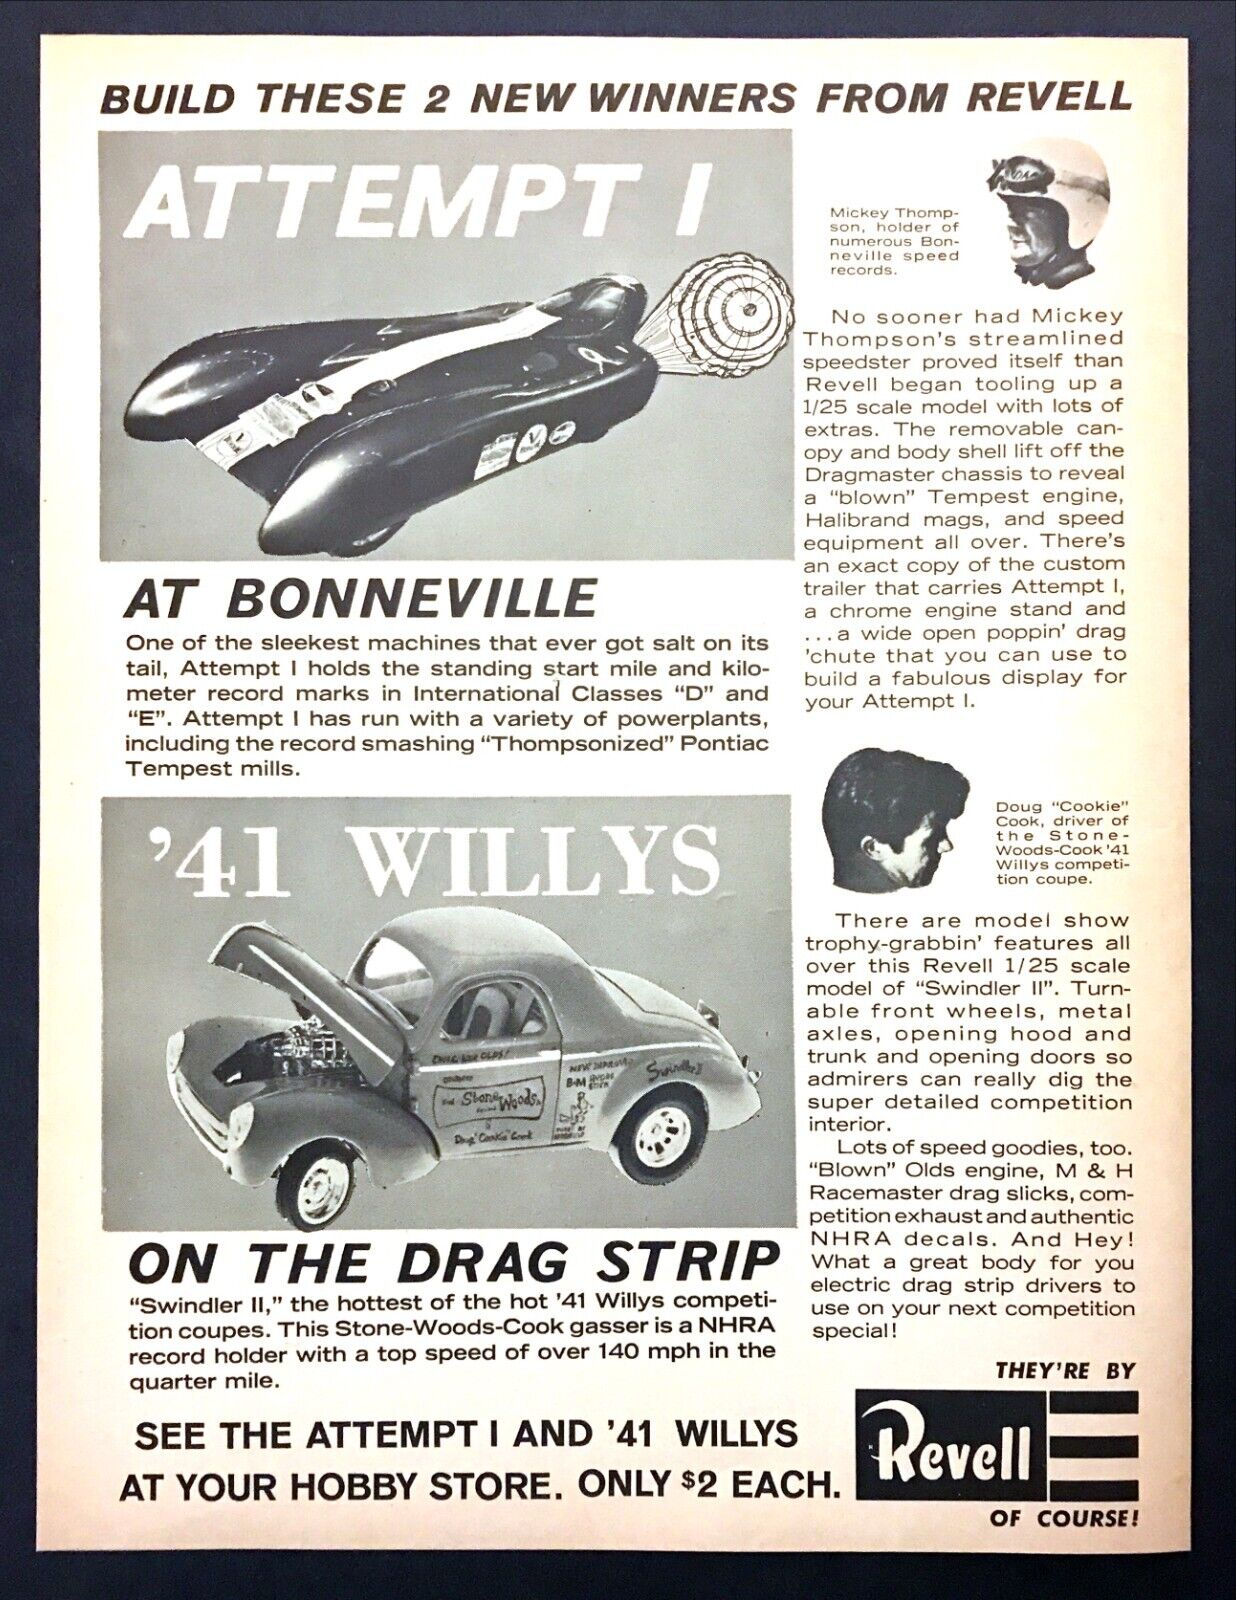 1964 Revell Stone Woods Cook \'41 Willys Racer Model Car photo vintage print ad